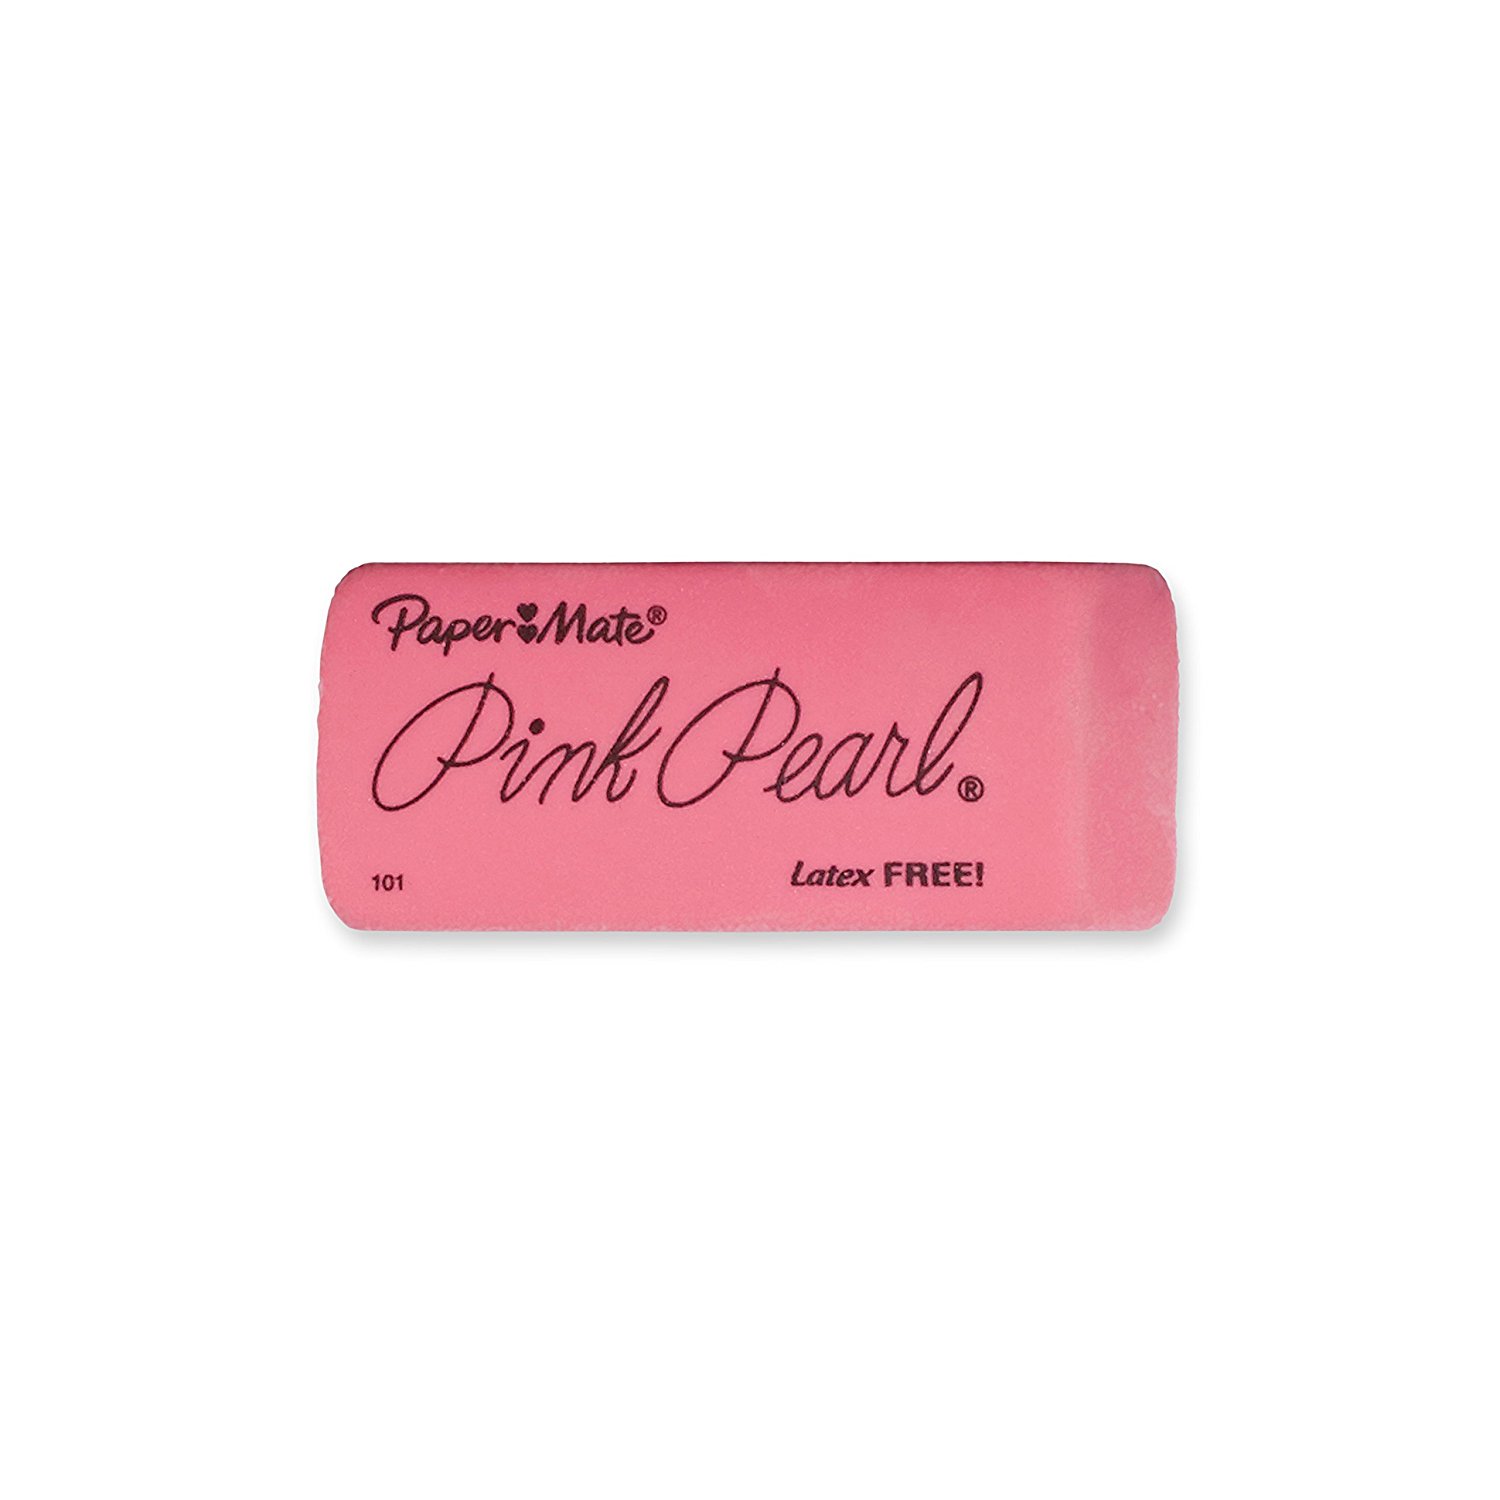 Amazon.com : Paper Mate Pink Pearl Erasers, Large, 3 Count : Pencil ...